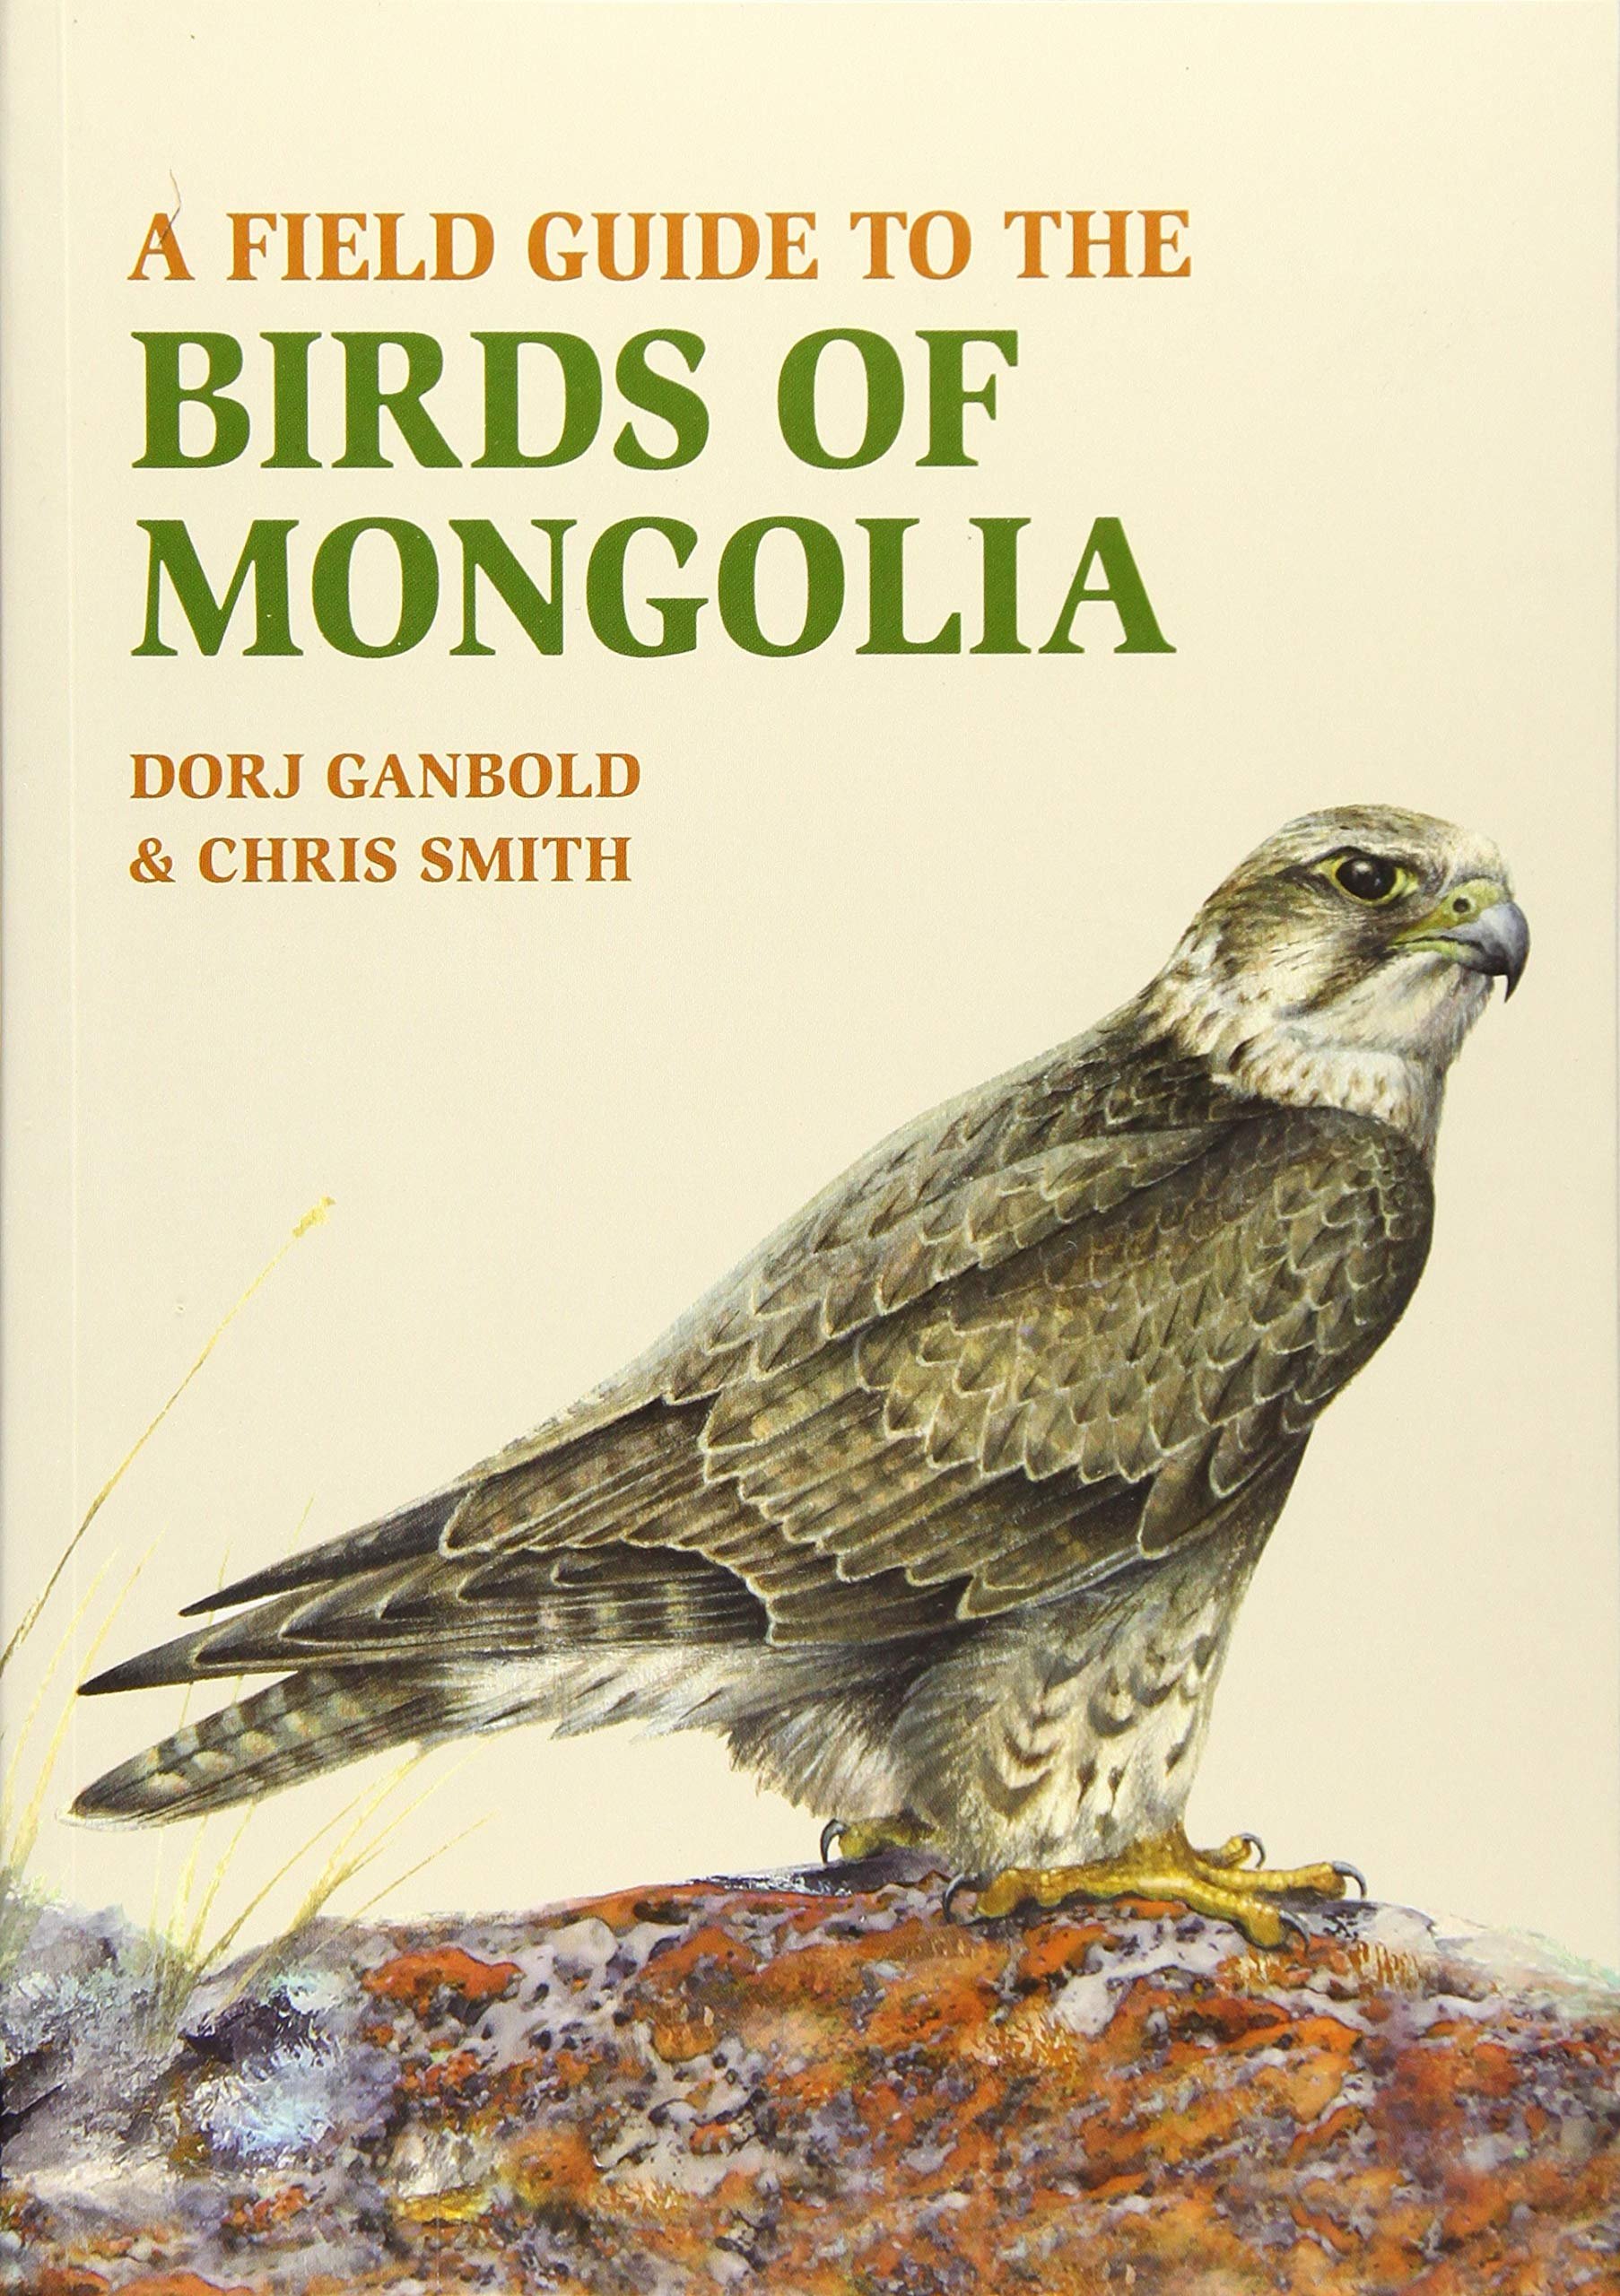 The first a field Guide to the Birds of Mongolia